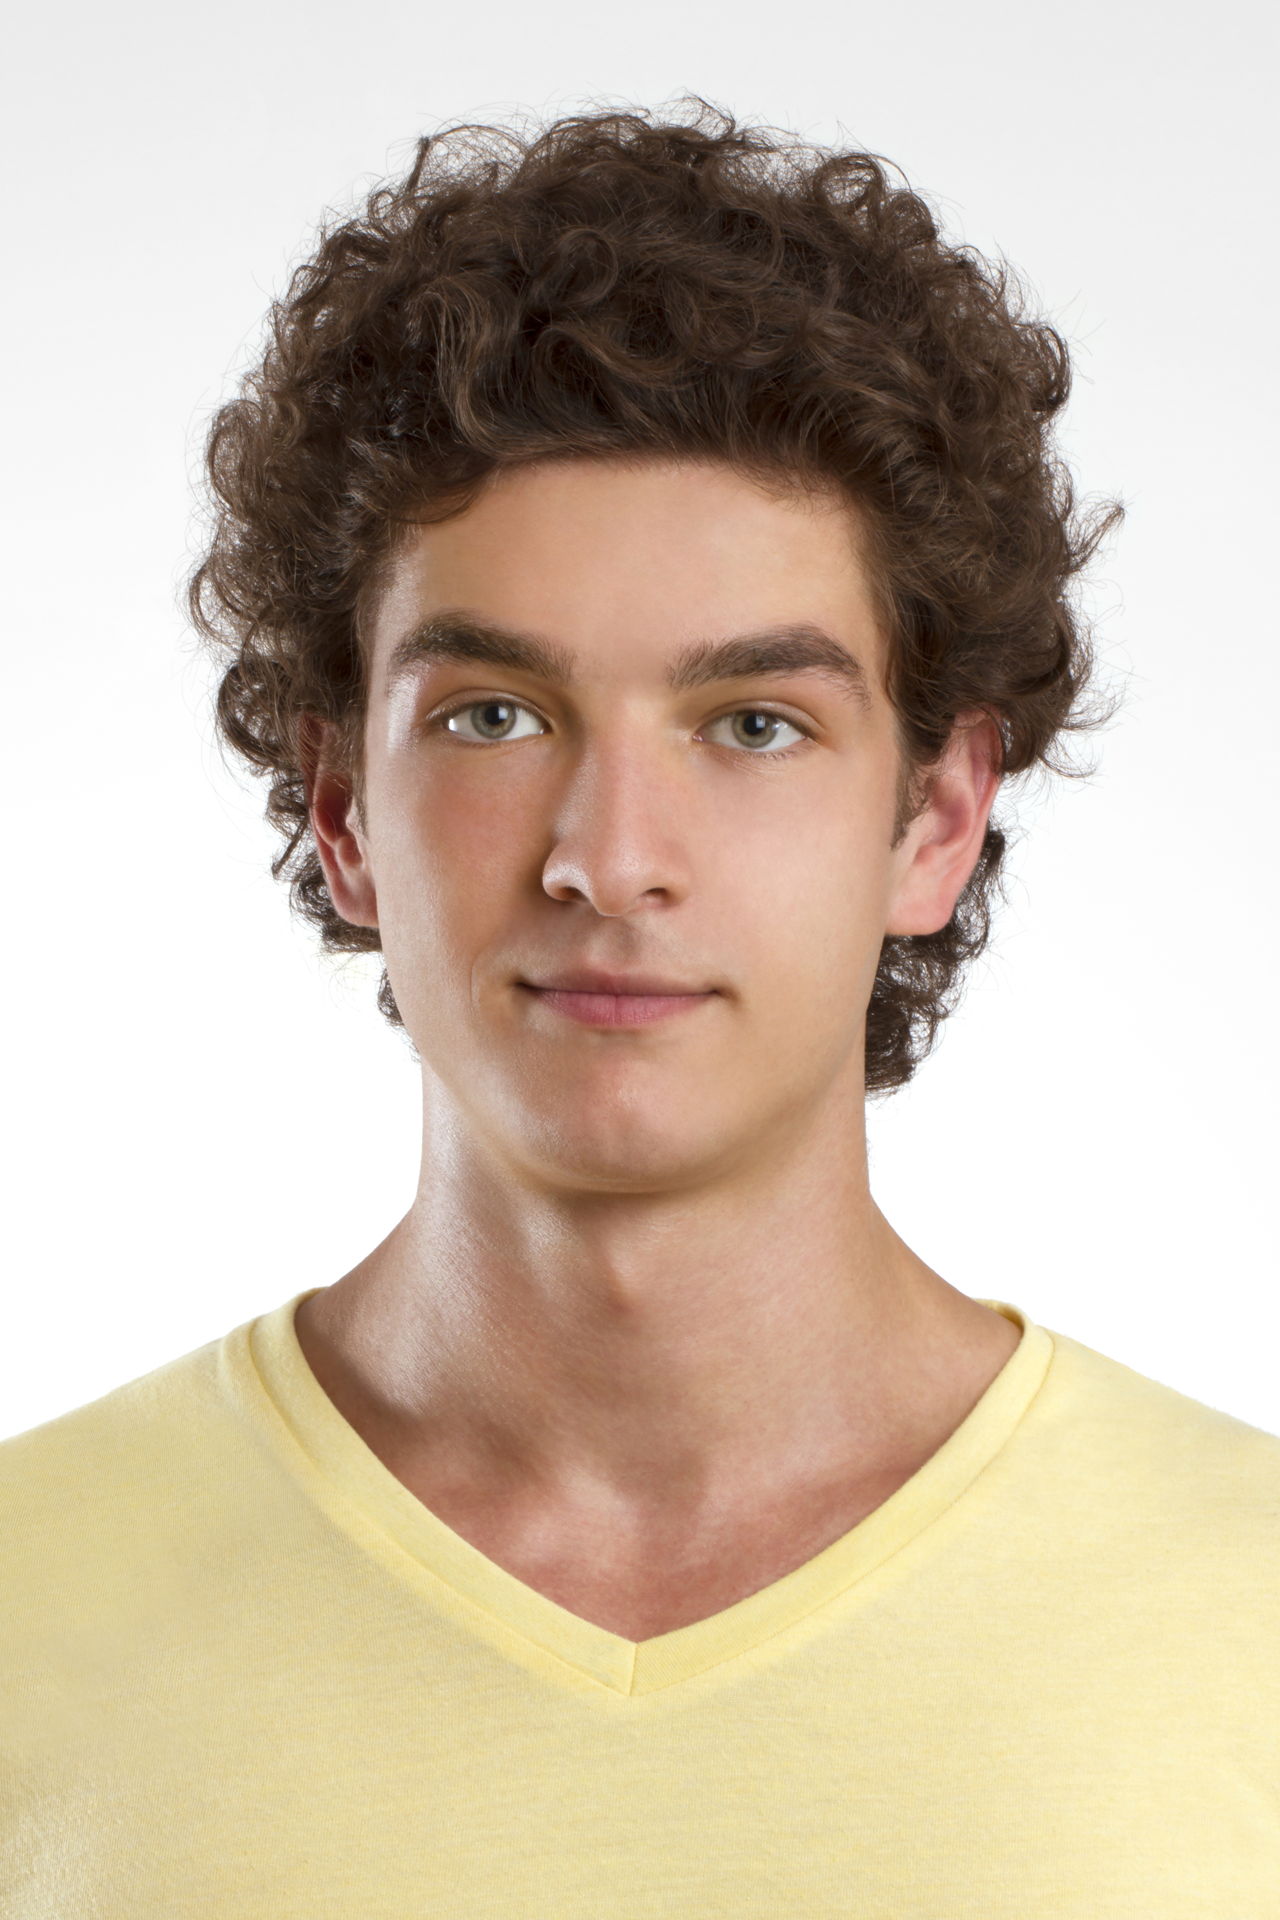 Perm Hairstyle For Men in curly hair